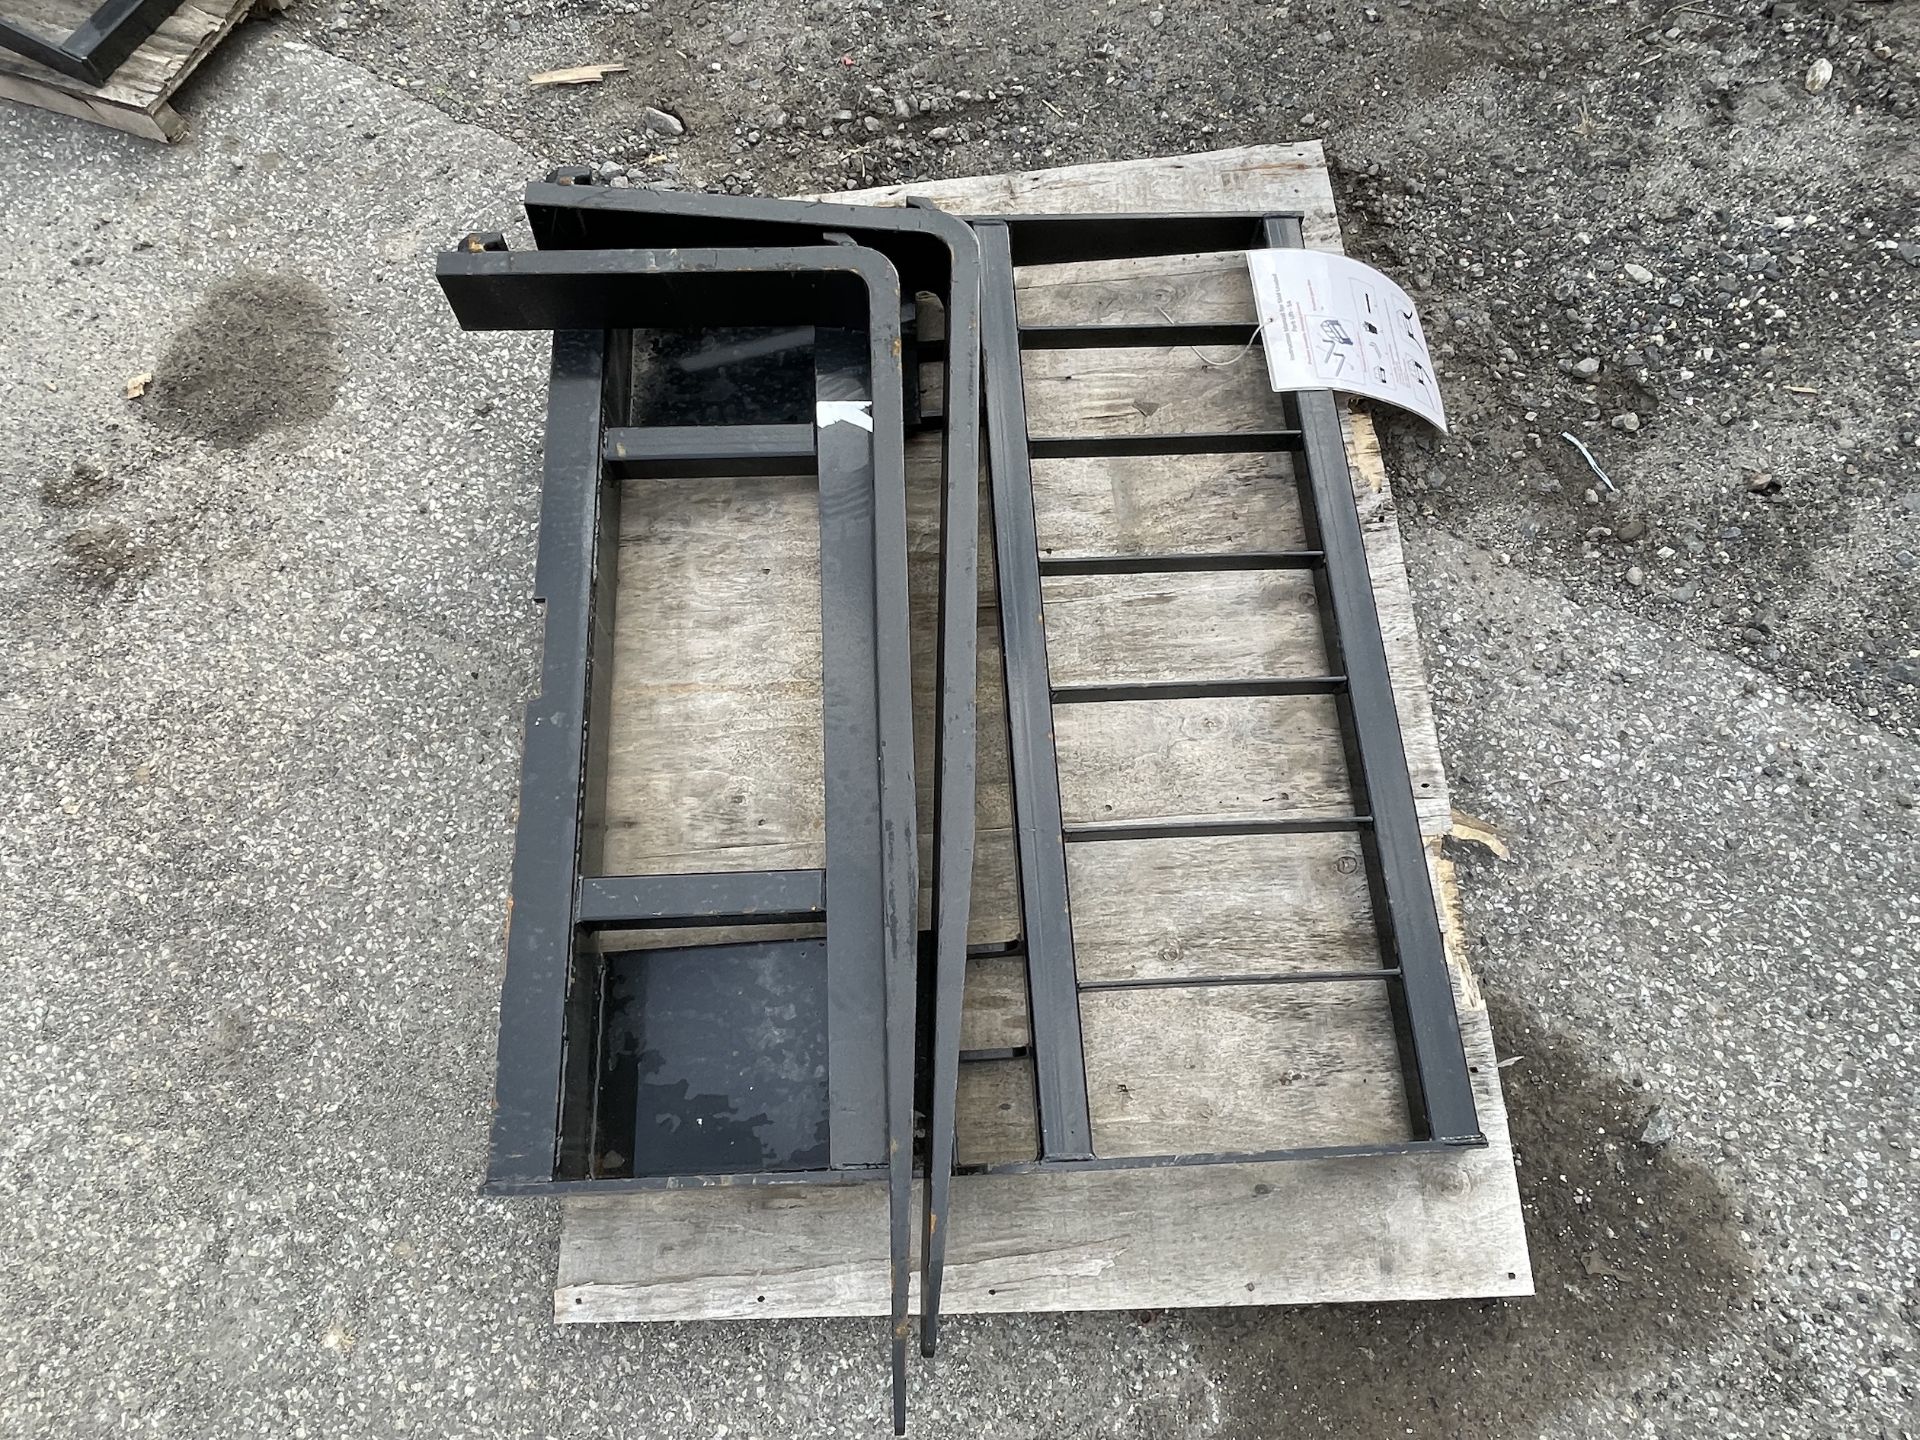 Brand New 48" Skid Steer Fork Attachment (ES31) - Lester, Pa - Image 4 of 4